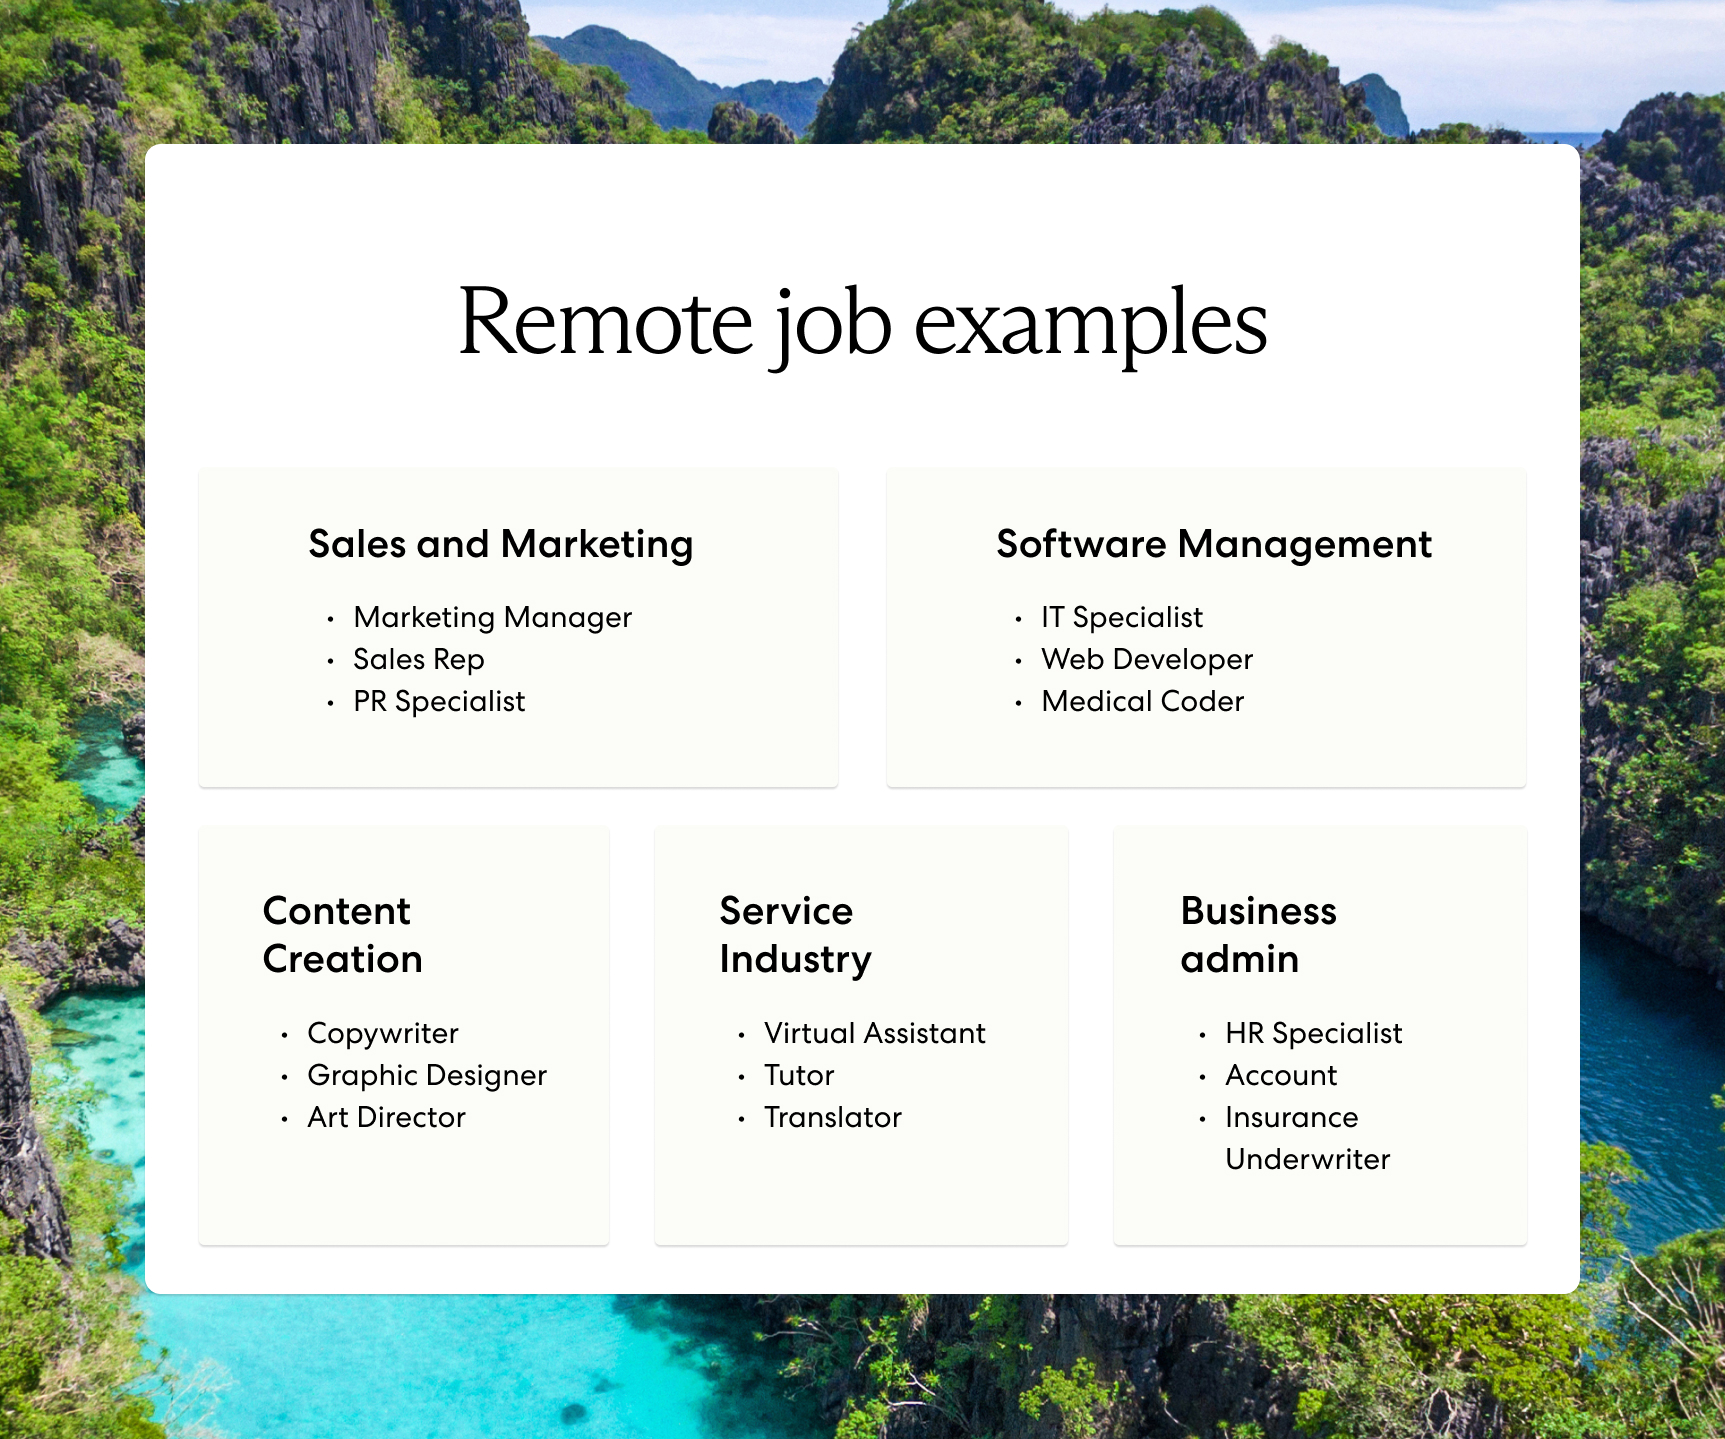 Graphic of remote job examples. Jobs include sales and marketing, software management, content creation, service industry, and business admin.